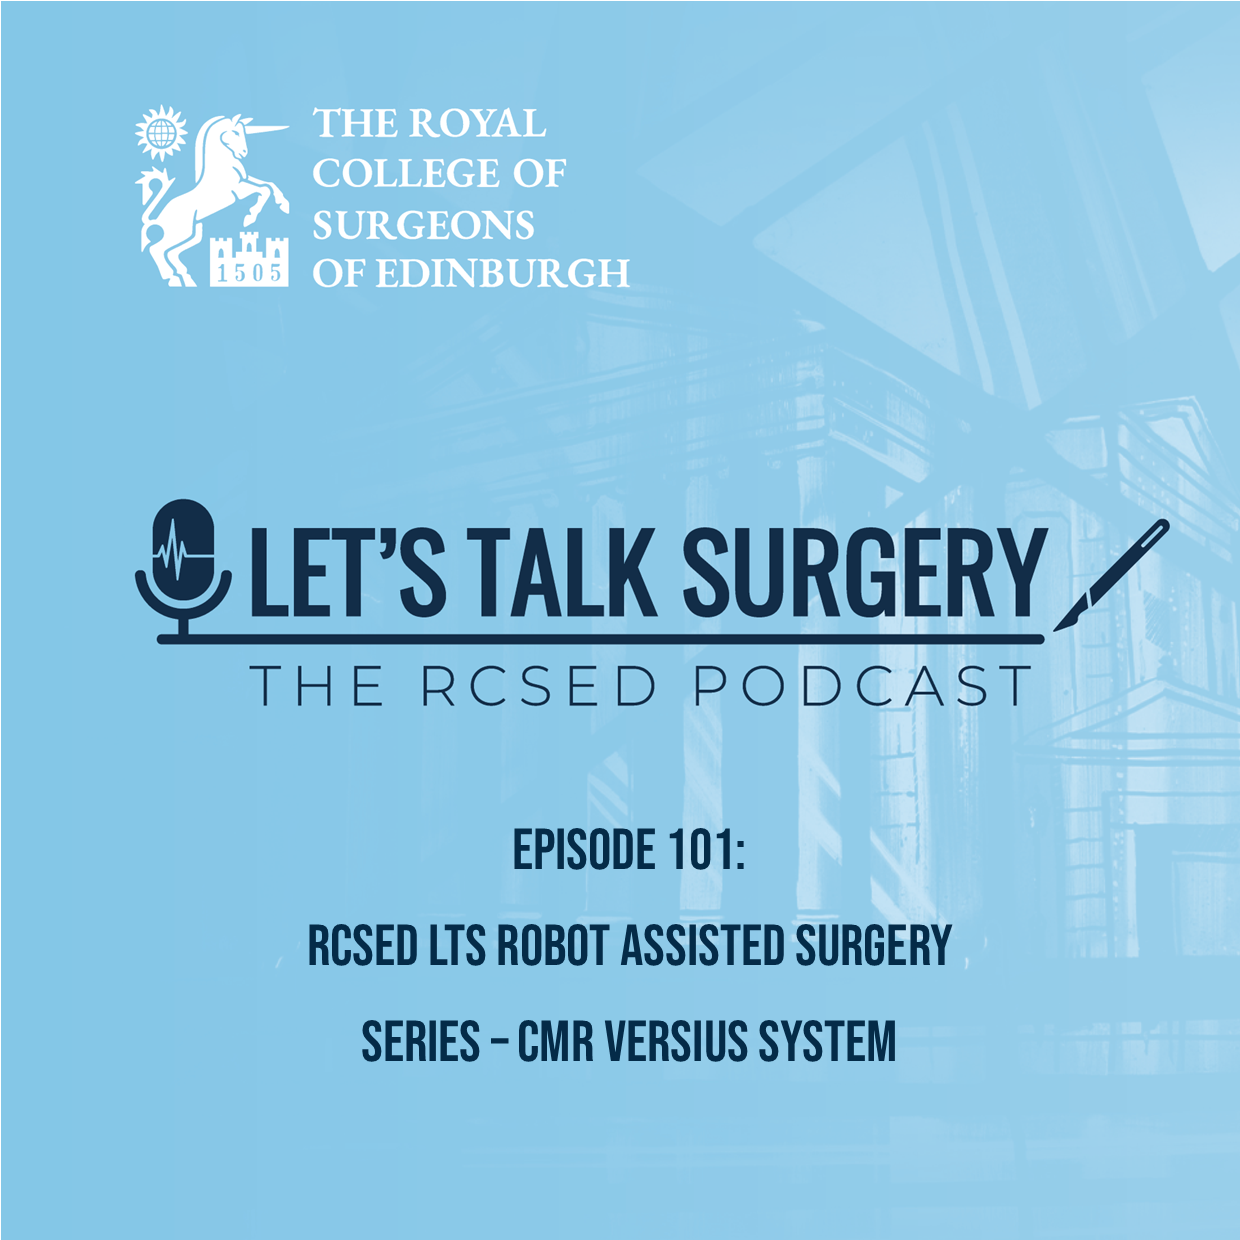 RCSED LTS Robot Assisted Surgery Series – CMR Versius System